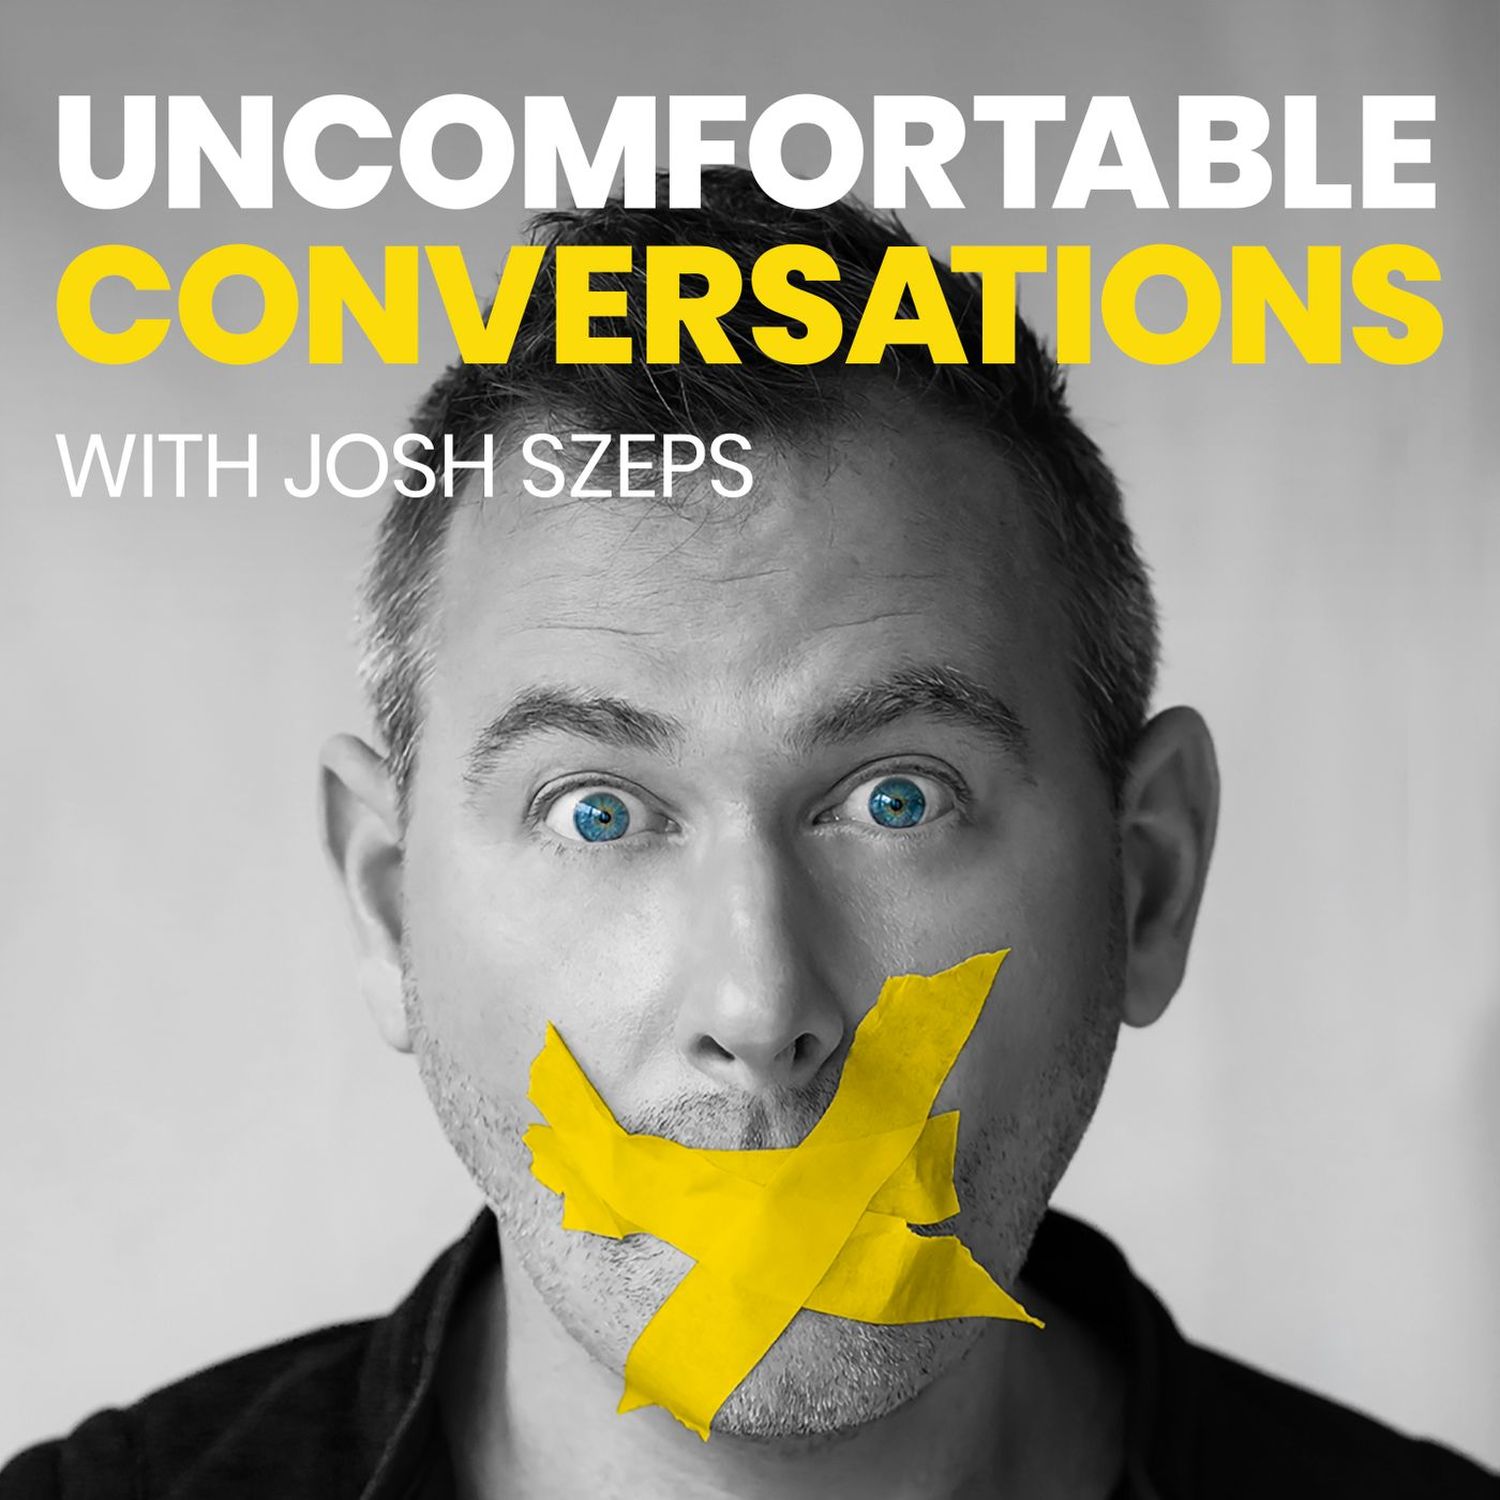 Josh Is One of the Few People in Australia to Discuss Negative Vaccine Side Effects